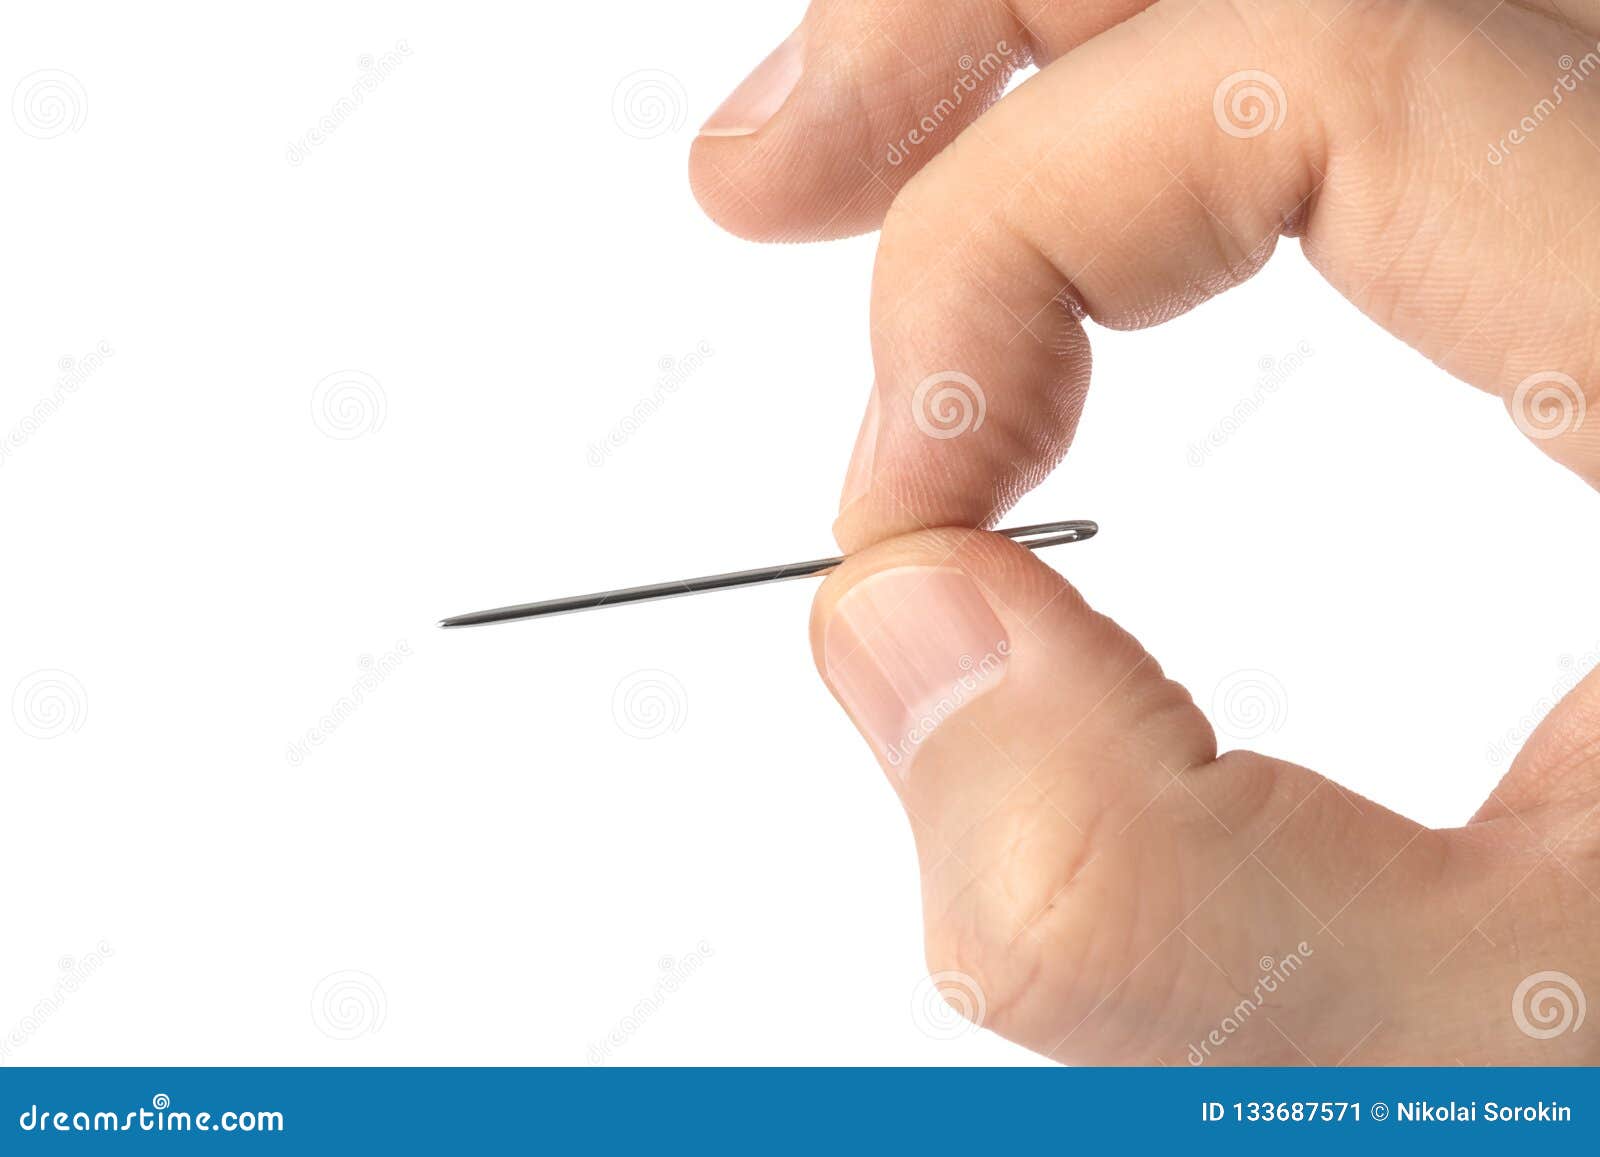 Fingers Holding a Needle with a Black Thread and a Coil on a Blue  Background Stock Image - Image of needle, linen: 120205223